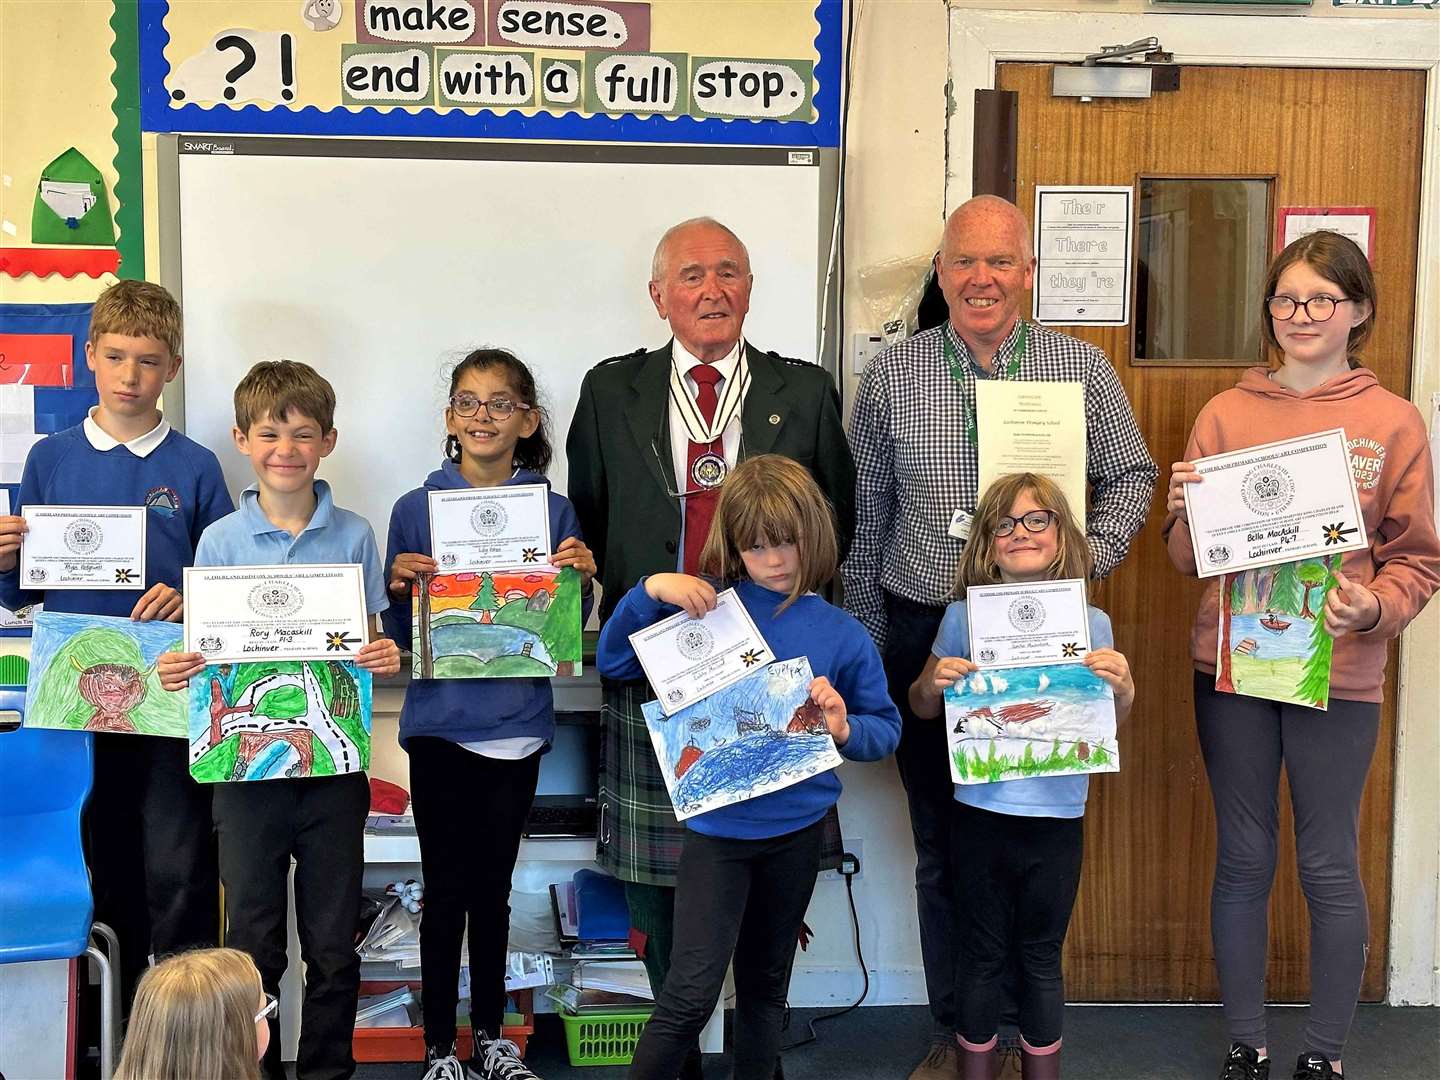 The certificates were presented to pupils at Lochinver Primary School by Deputy Lieutenant David Grant. A certificate from the Lord Lyon King of Arms was presented to teacher Colin Masterson.